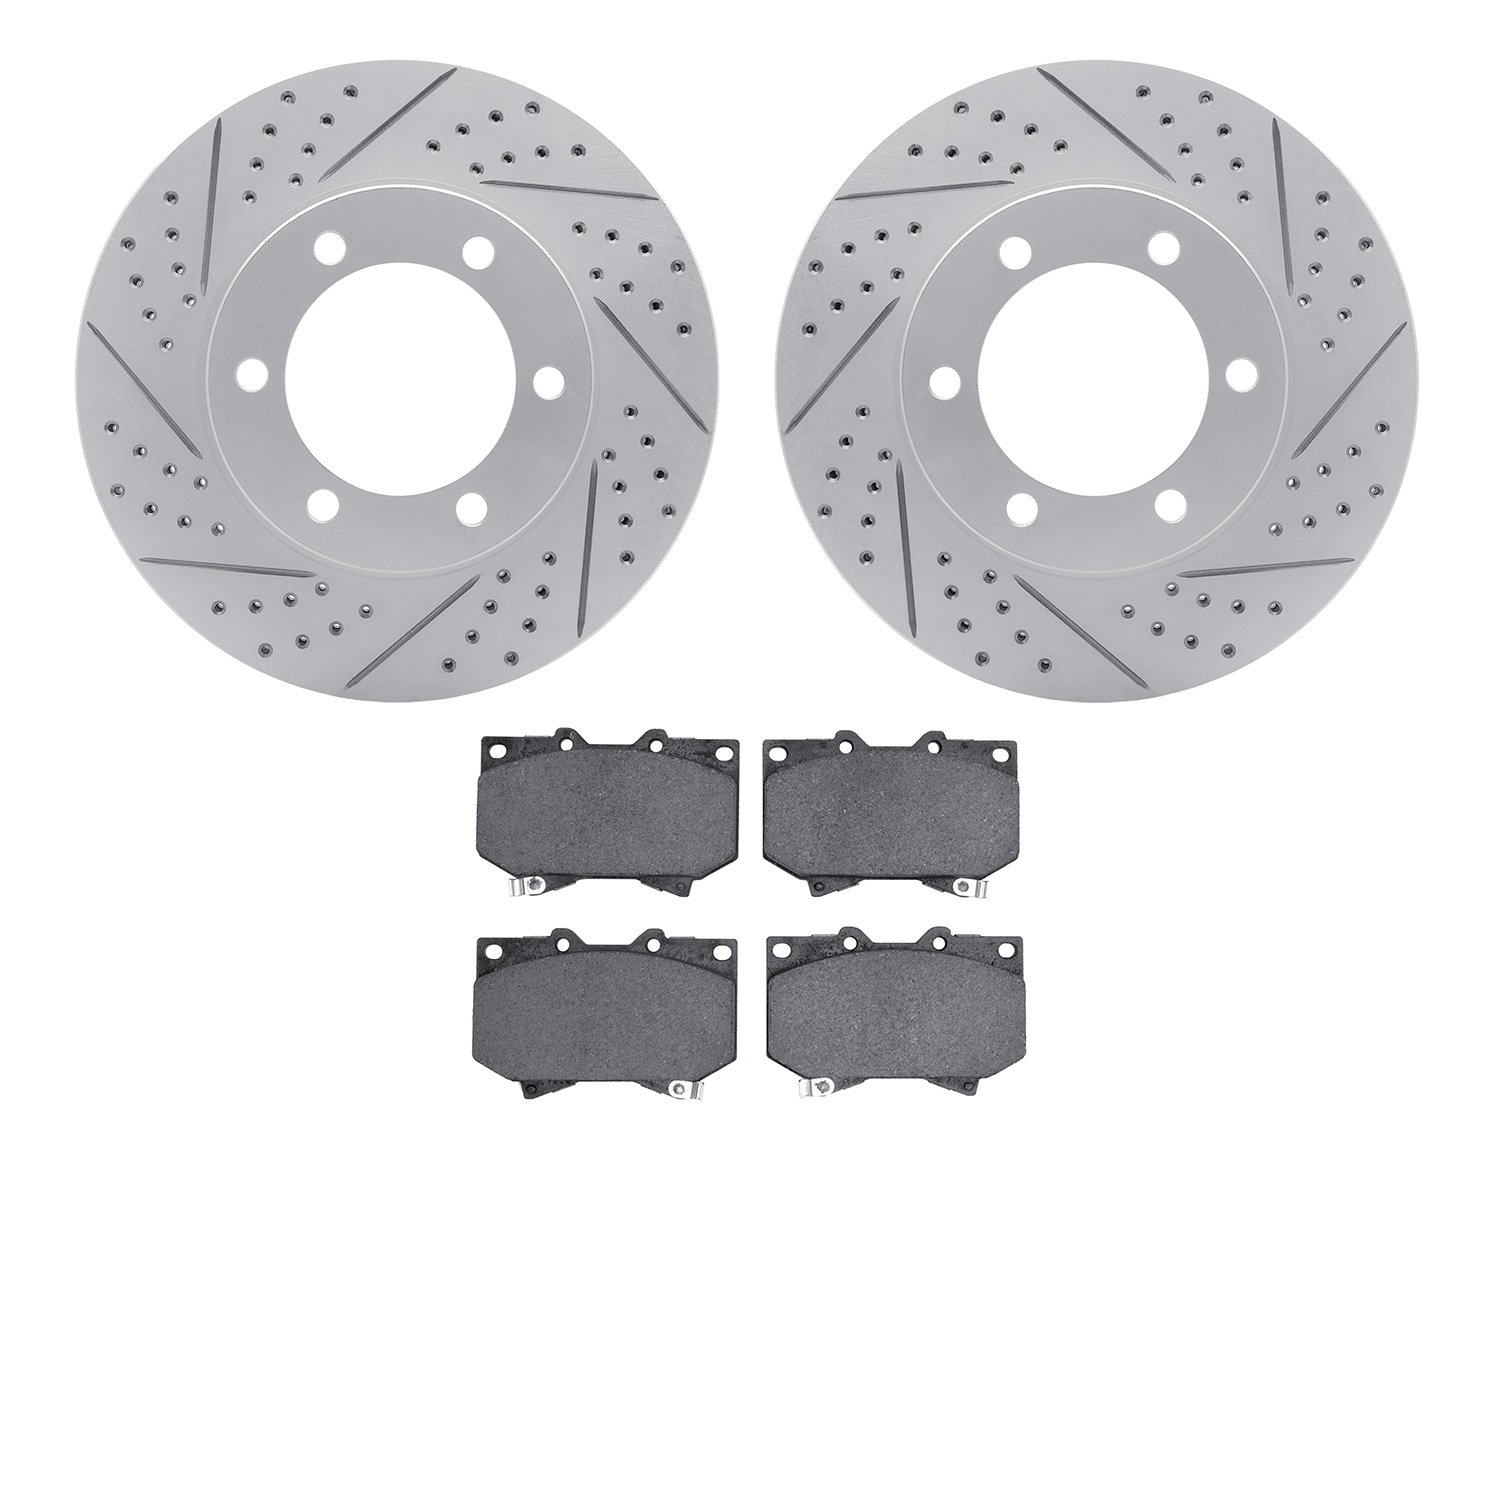 2202-76001 Geoperformance Drilled/Slotted Rotors w/Heavy-Duty Pads Kit, 2000-2002 Lexus/Toyota/Scion, Position: Front